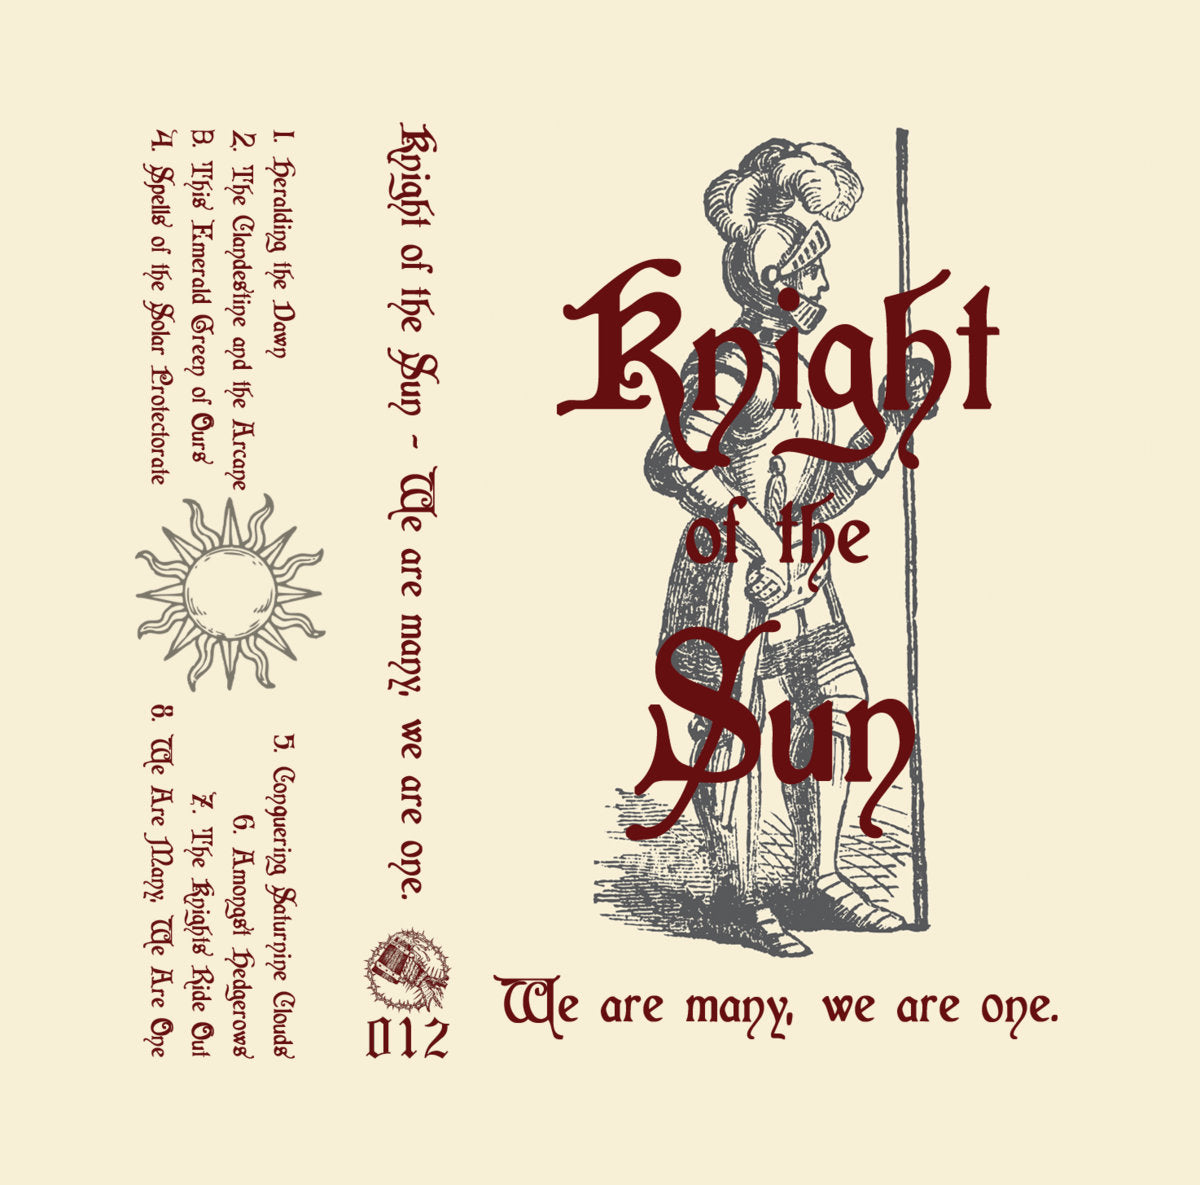 [SOLD OUT] KNIGHT OF THE SUN "We Are Many, We Are One" cassette tape (lim.50)